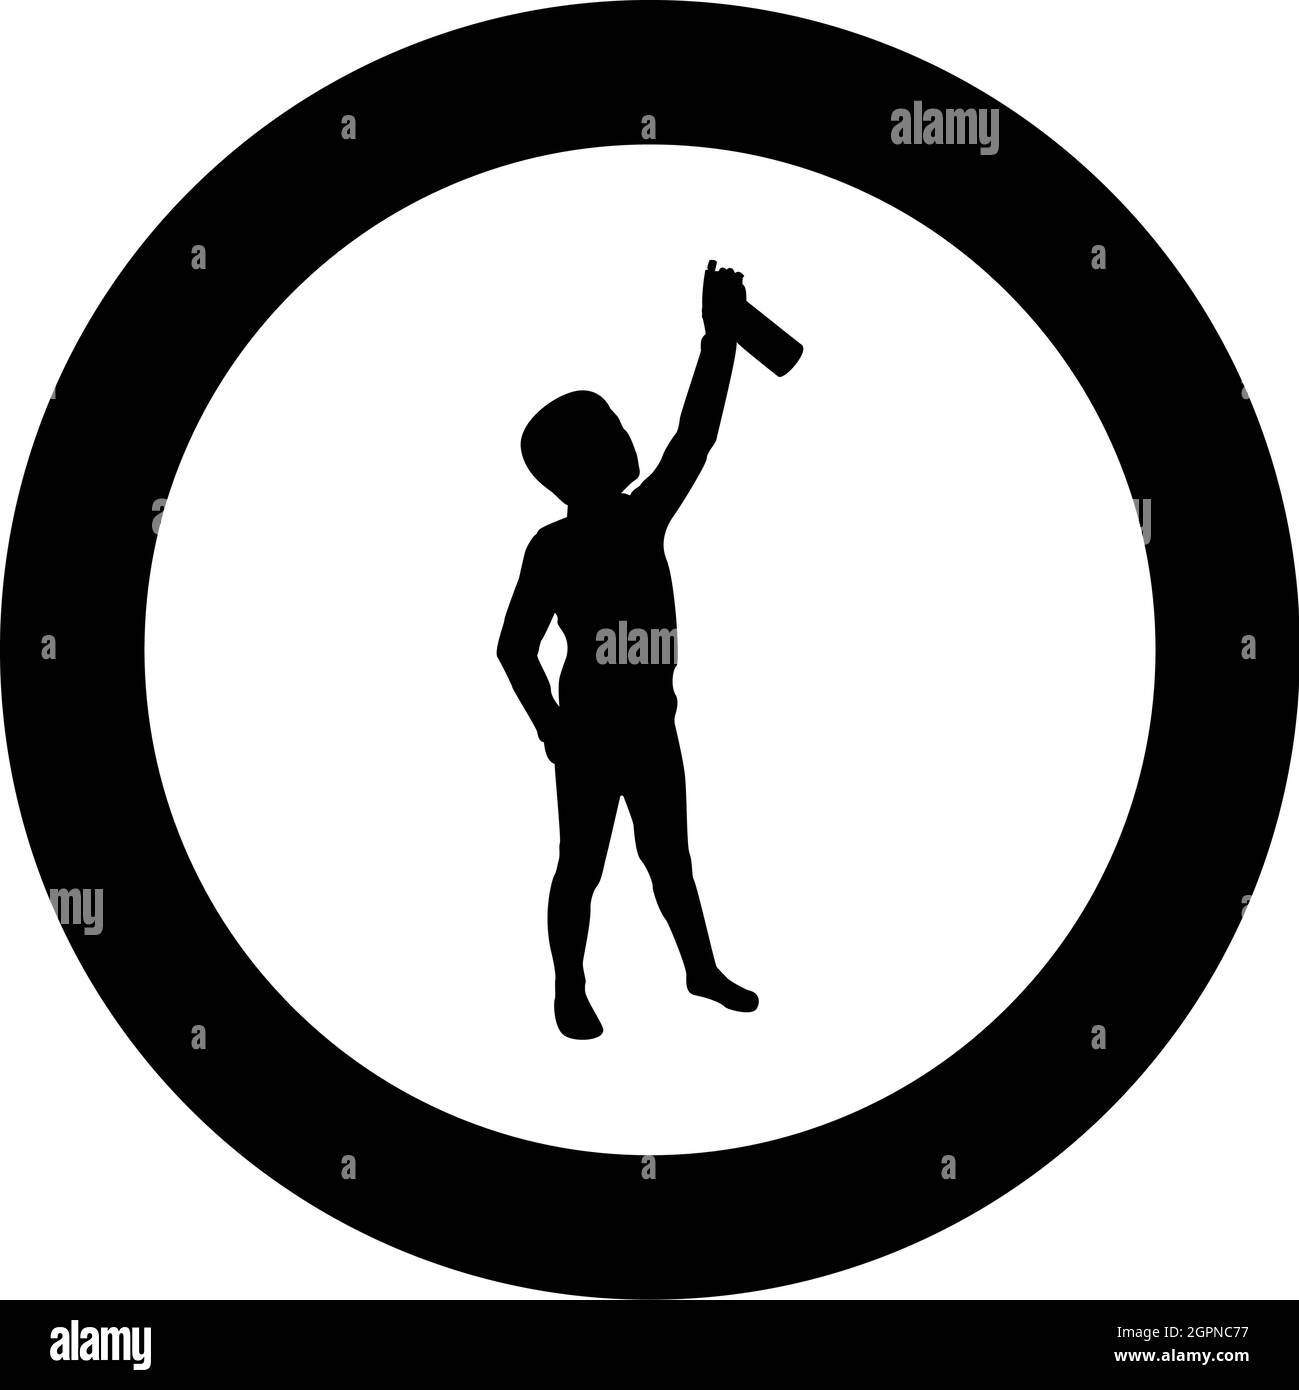 Boy using water sprayed in up Small kid watering garden using hand sprinkler Holding arm special comb silhouette in circle round black color vector illustration solid outline style image Stock Vector